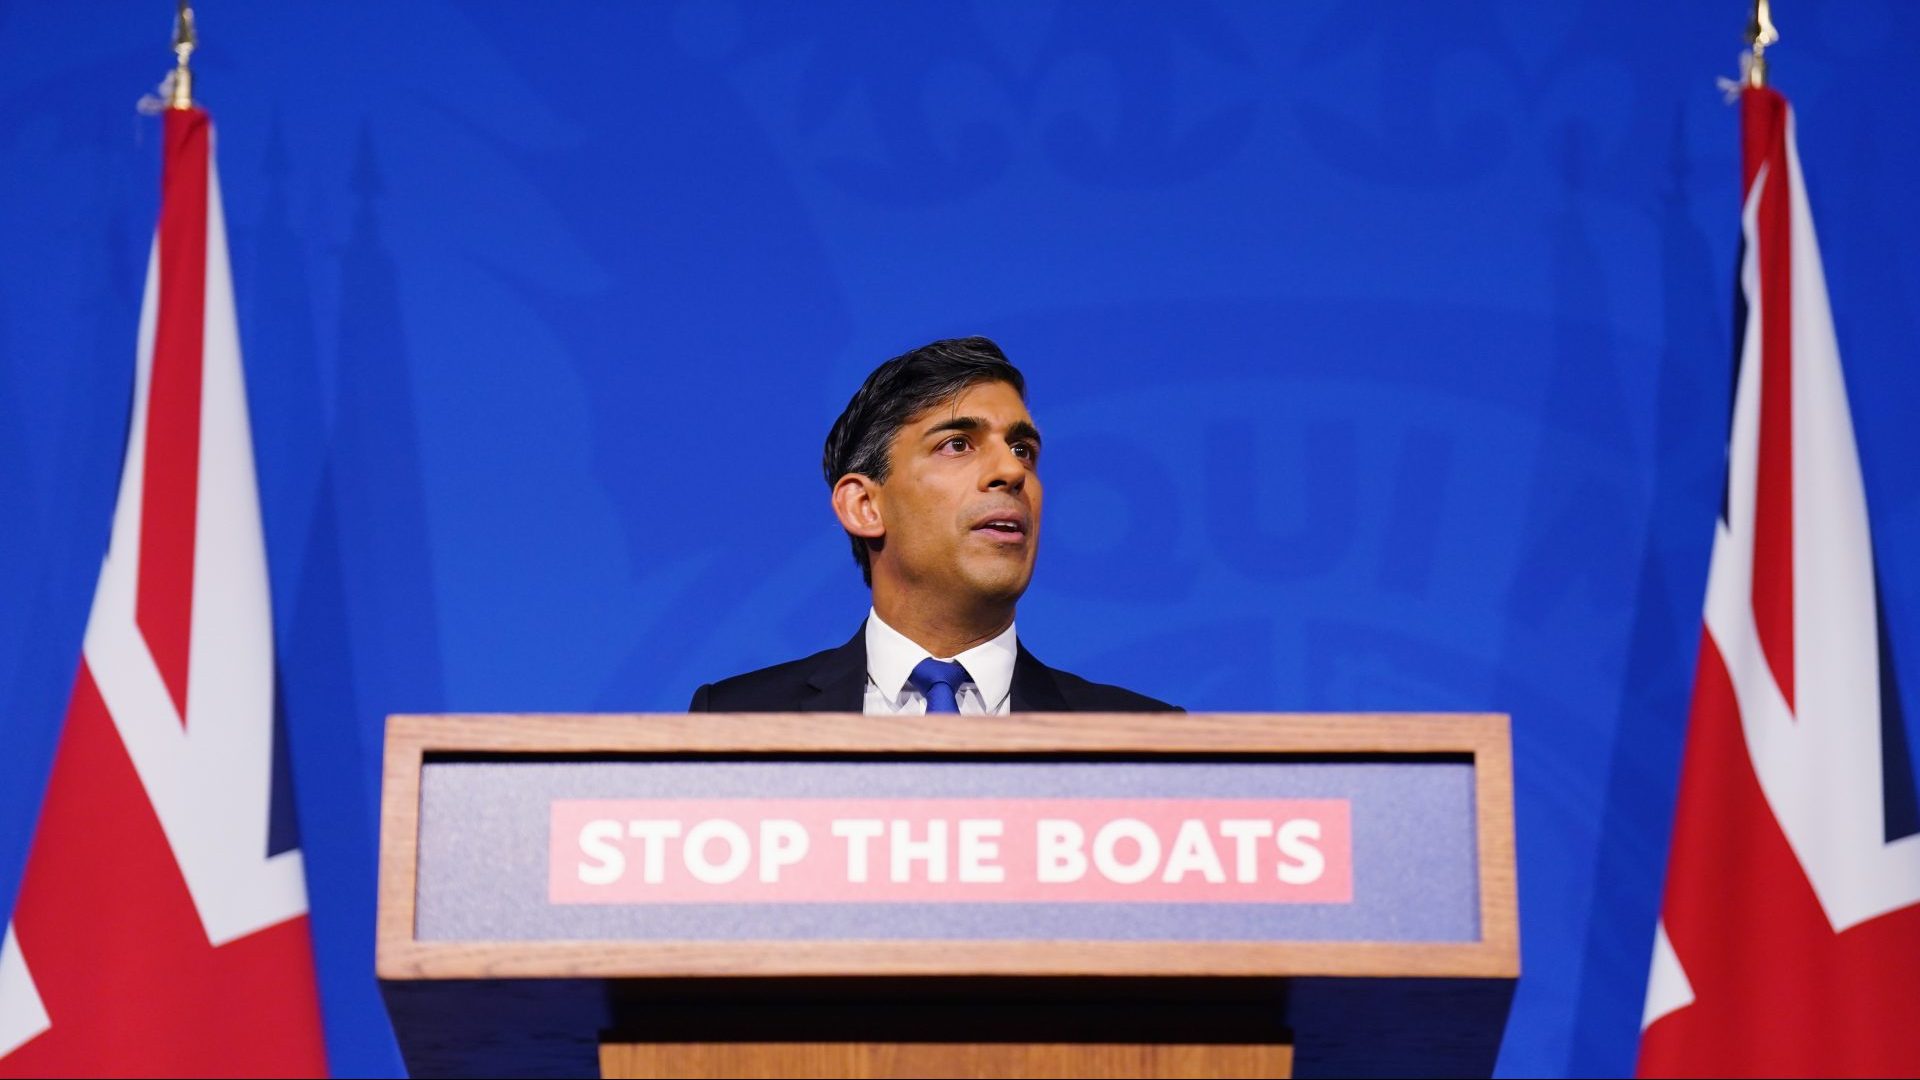 Rishi Sunak conducts a press conference in the Downing Street Briefing Room. Photo: James Manning - WPA Pool/Getty Images